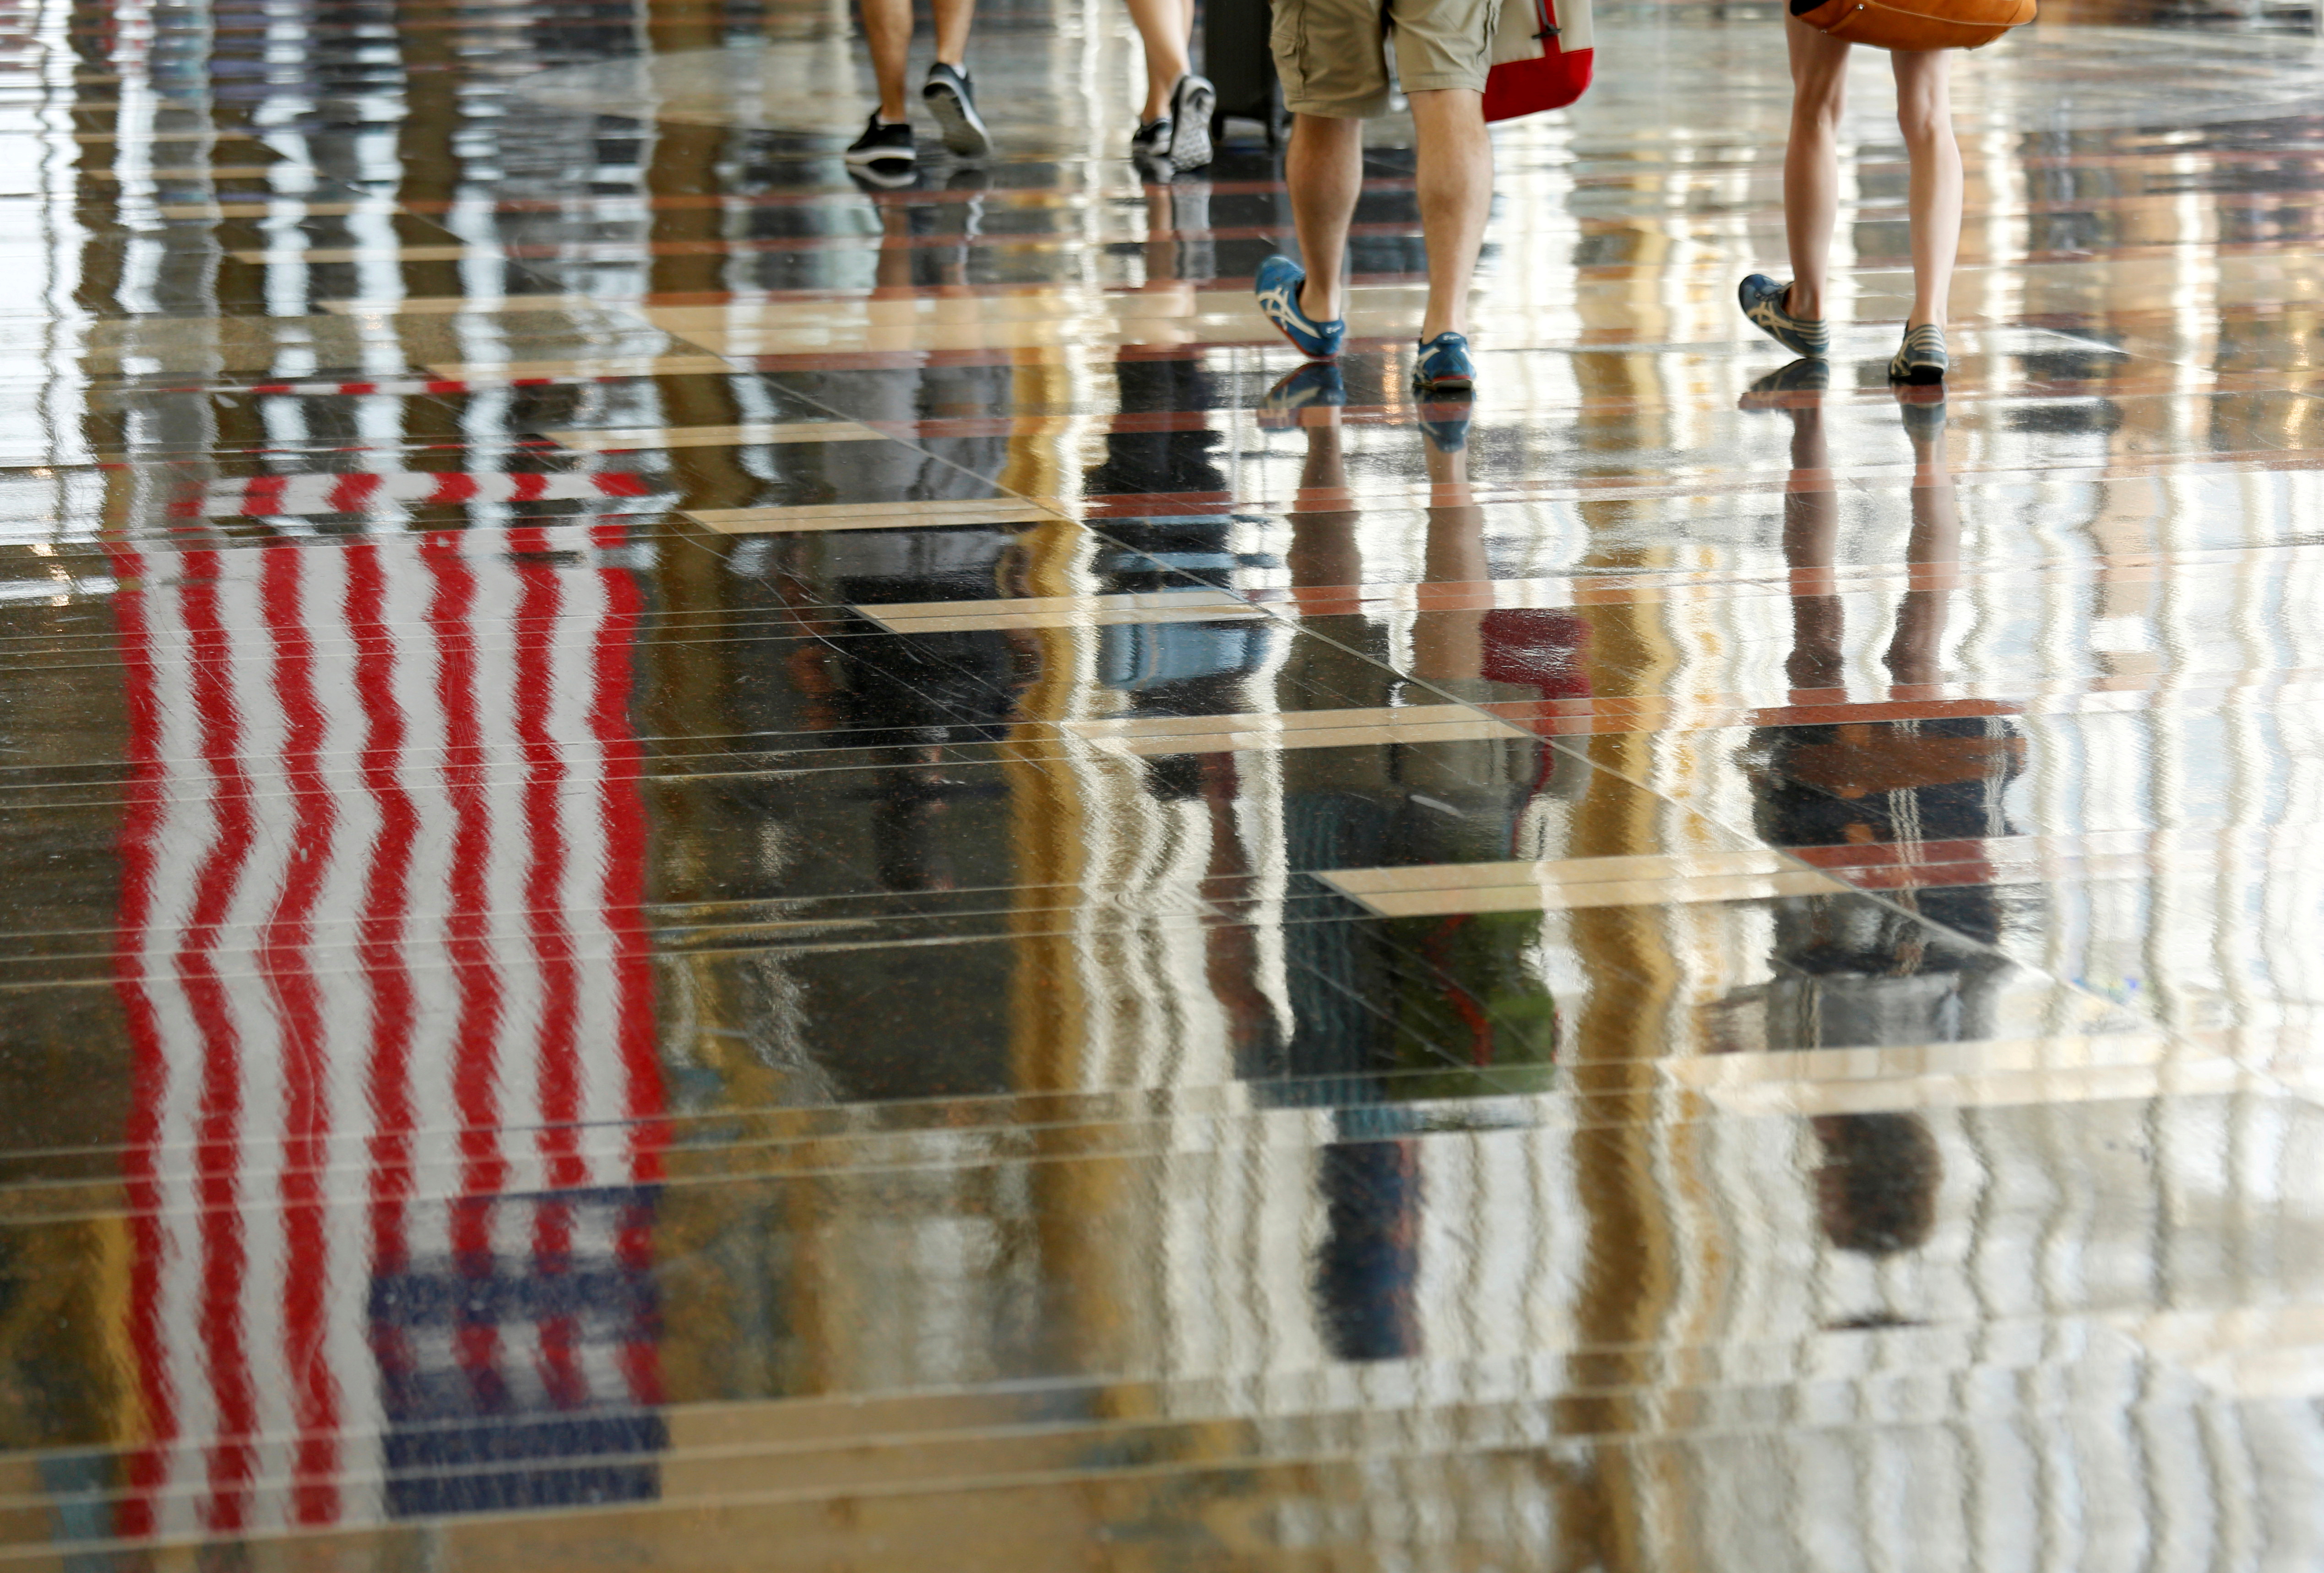 A U.S. flag is reflected on the floor as passengers make their way through Reagan National Airport at the start of the Independence Day holiday weekend in Washington